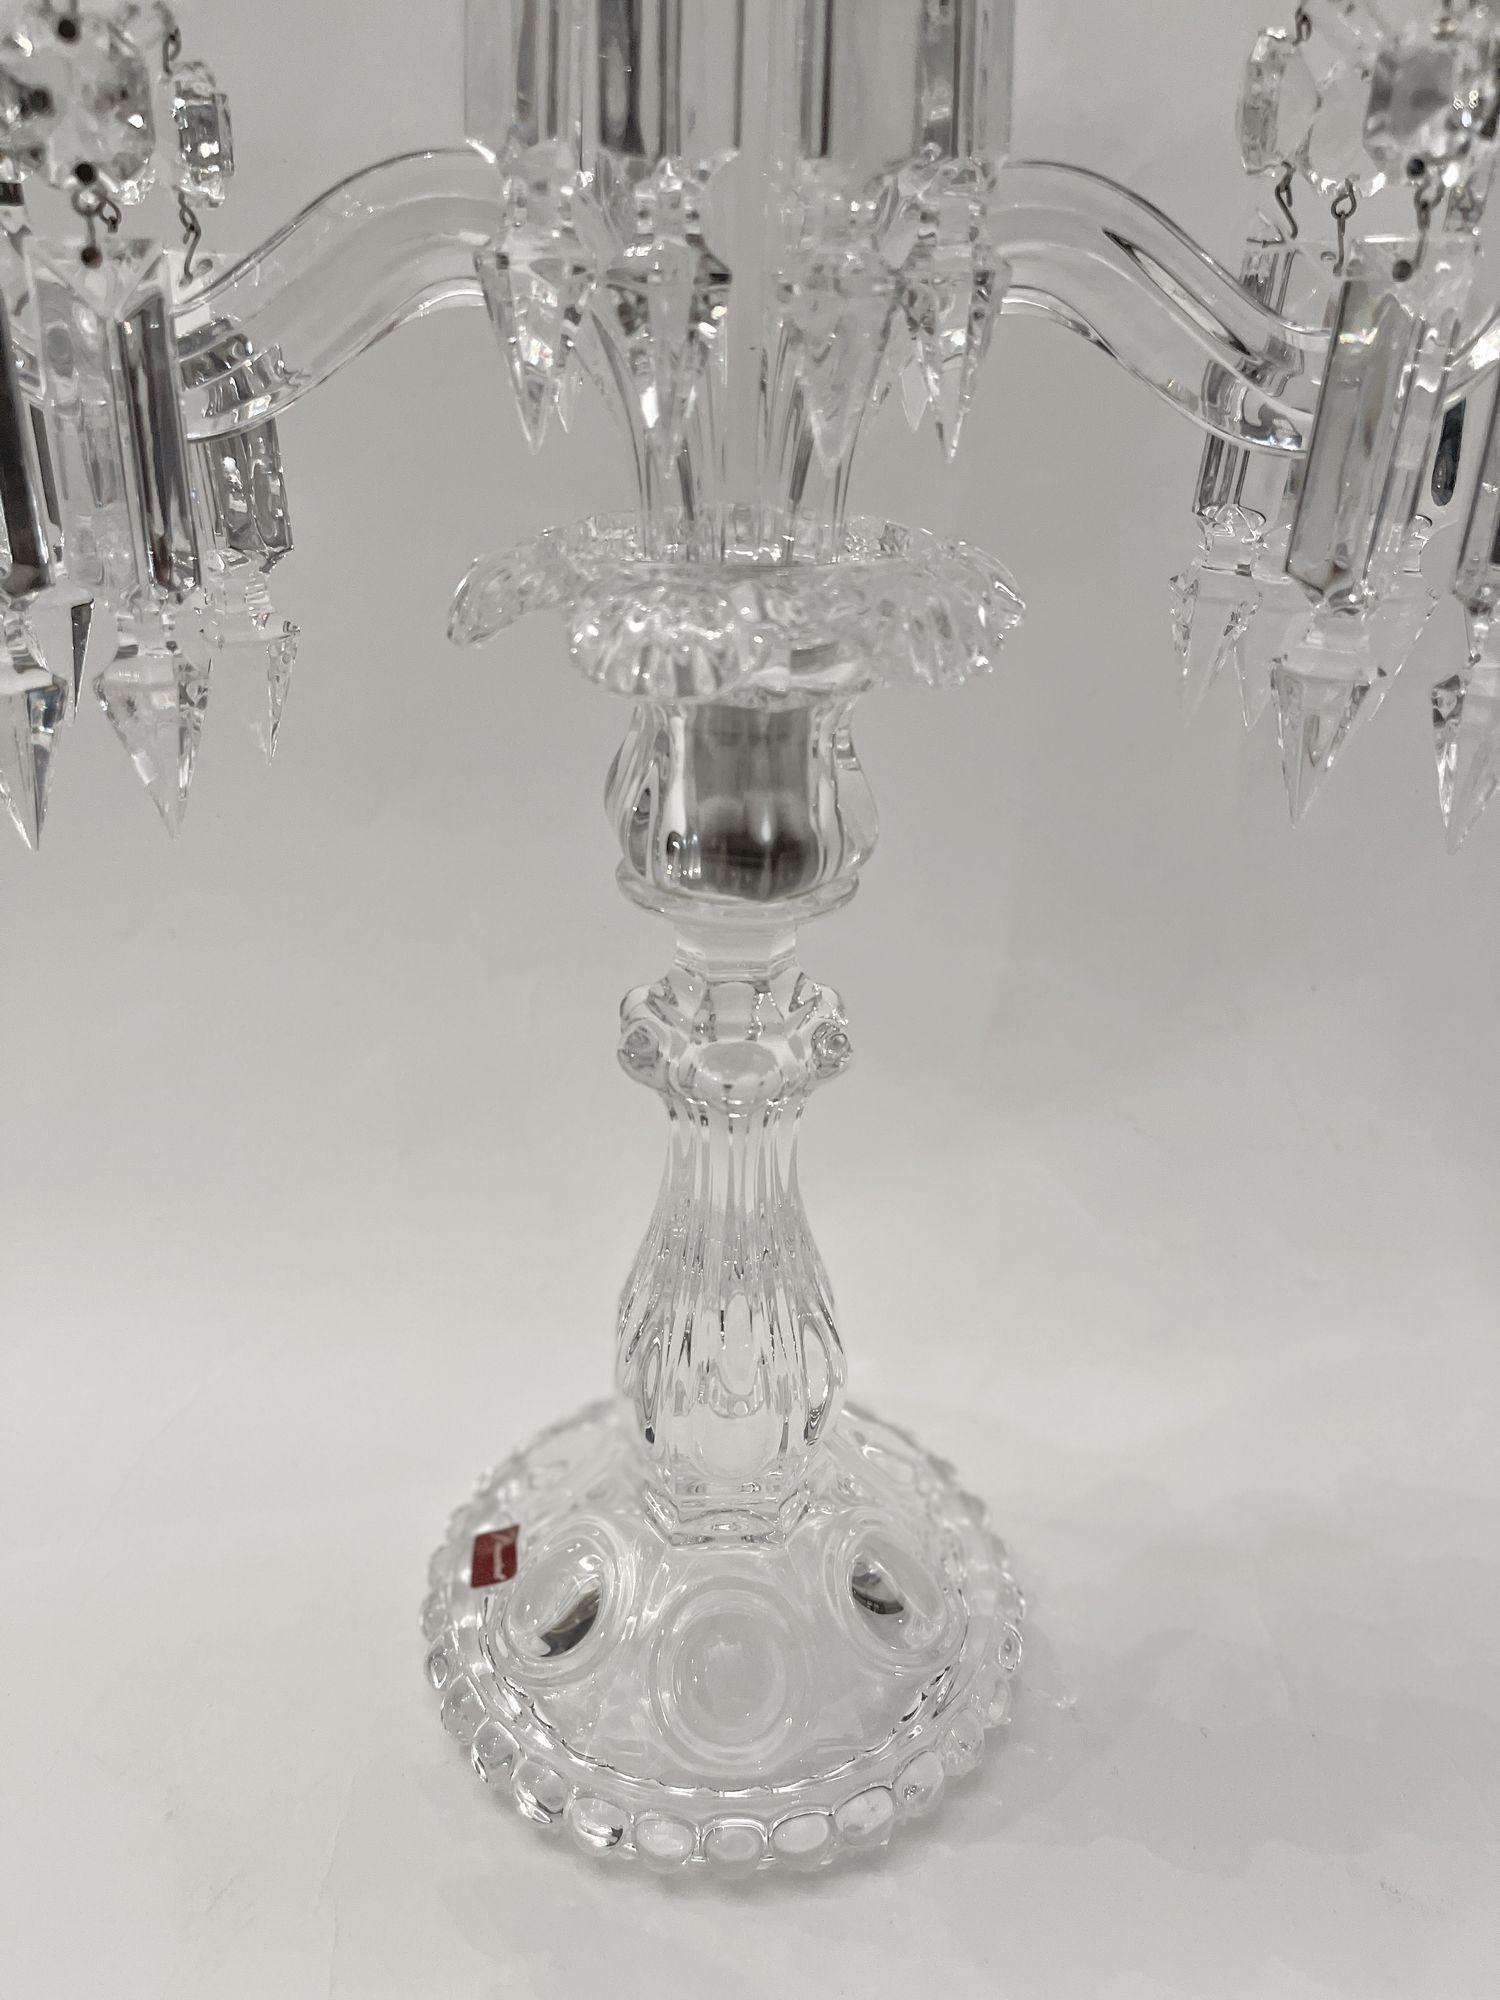 French Pair of Mid-Century Modern Neoclassical Glass Obelisk Candelabras by Baccarat For Sale